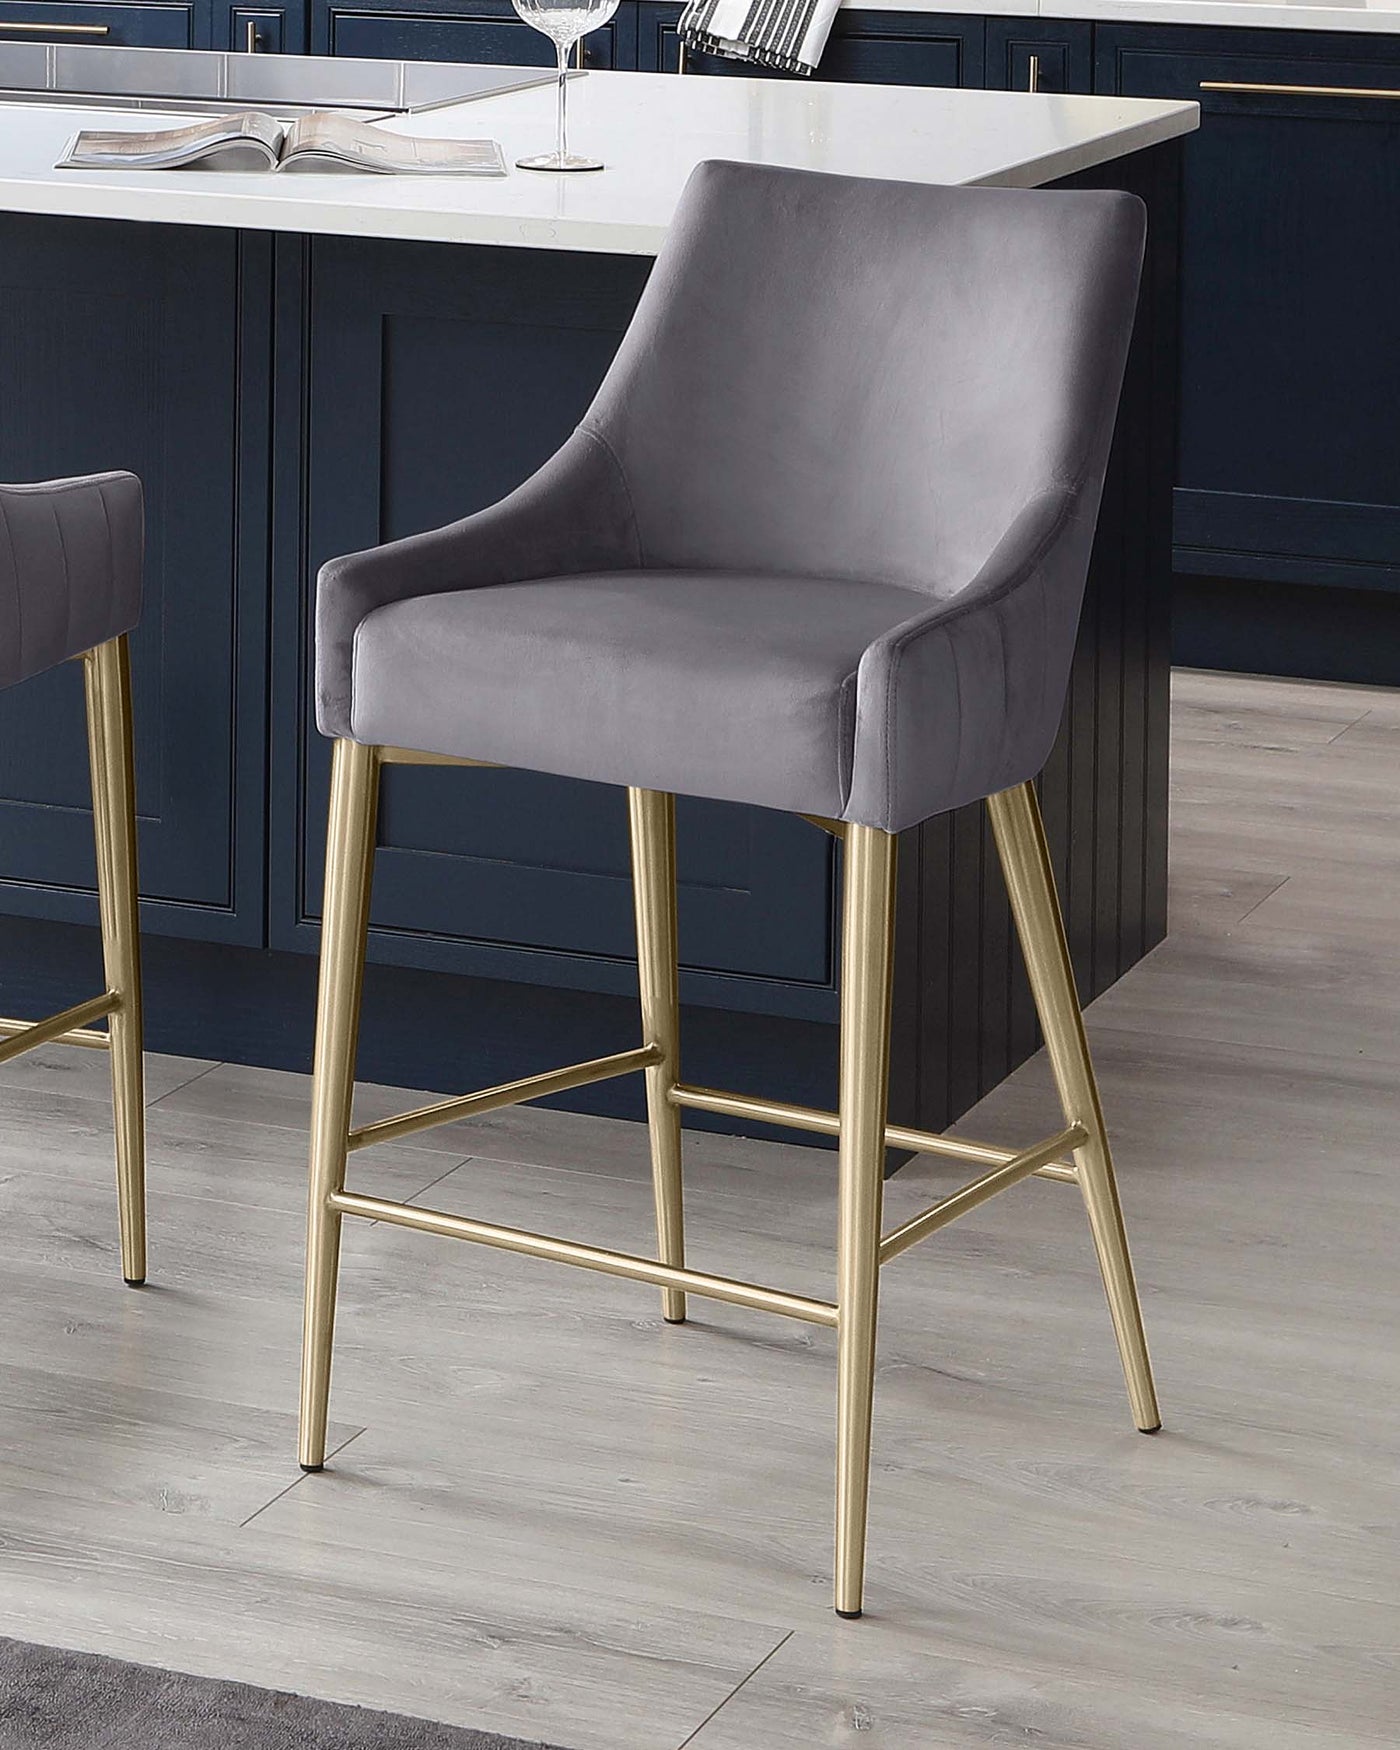 Elegant grey velvet barstool with a curved backrest and armrests, featuring sleek gold metal legs with a square footrest.